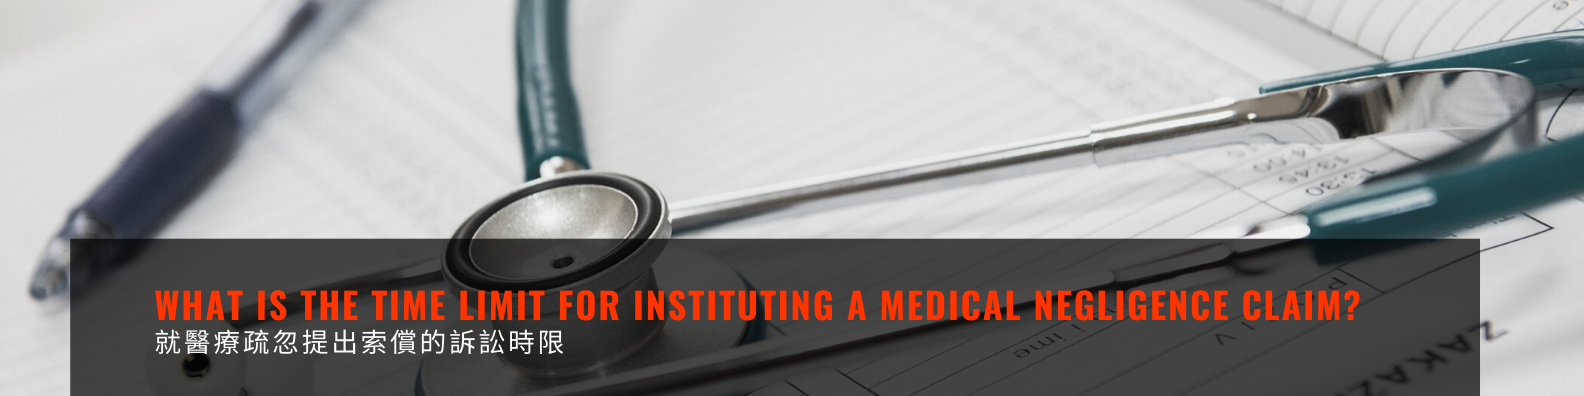 What is the time limit for instituting a medical negligence claim?